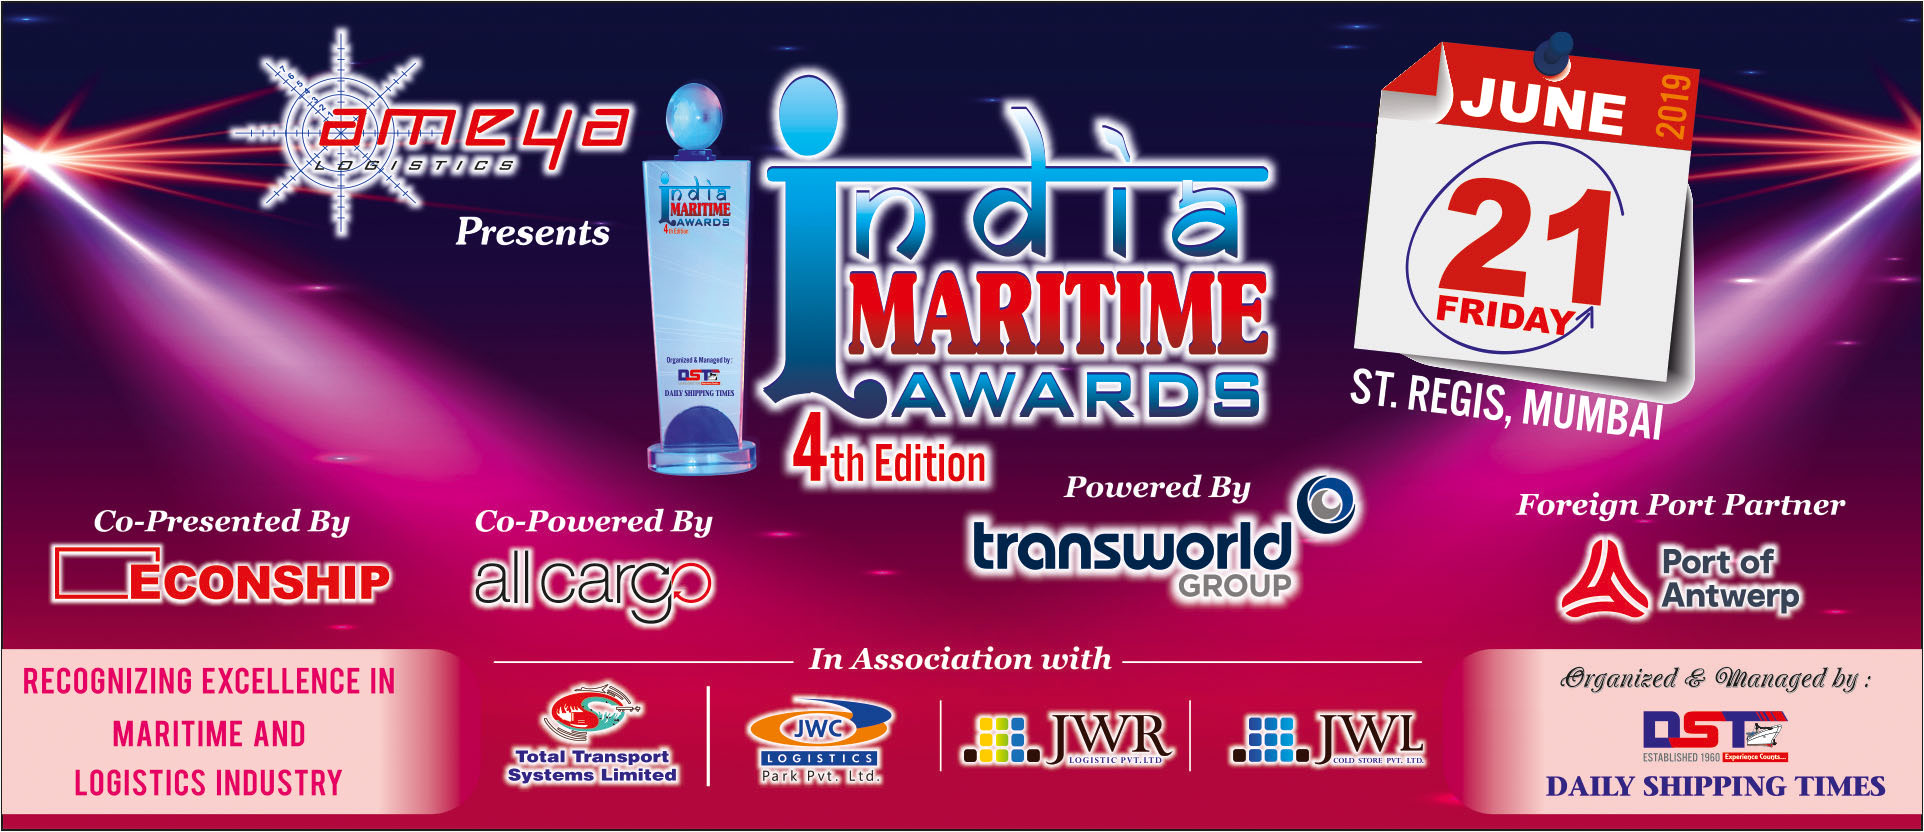 India Maritime Awards - 4th Edition Winners